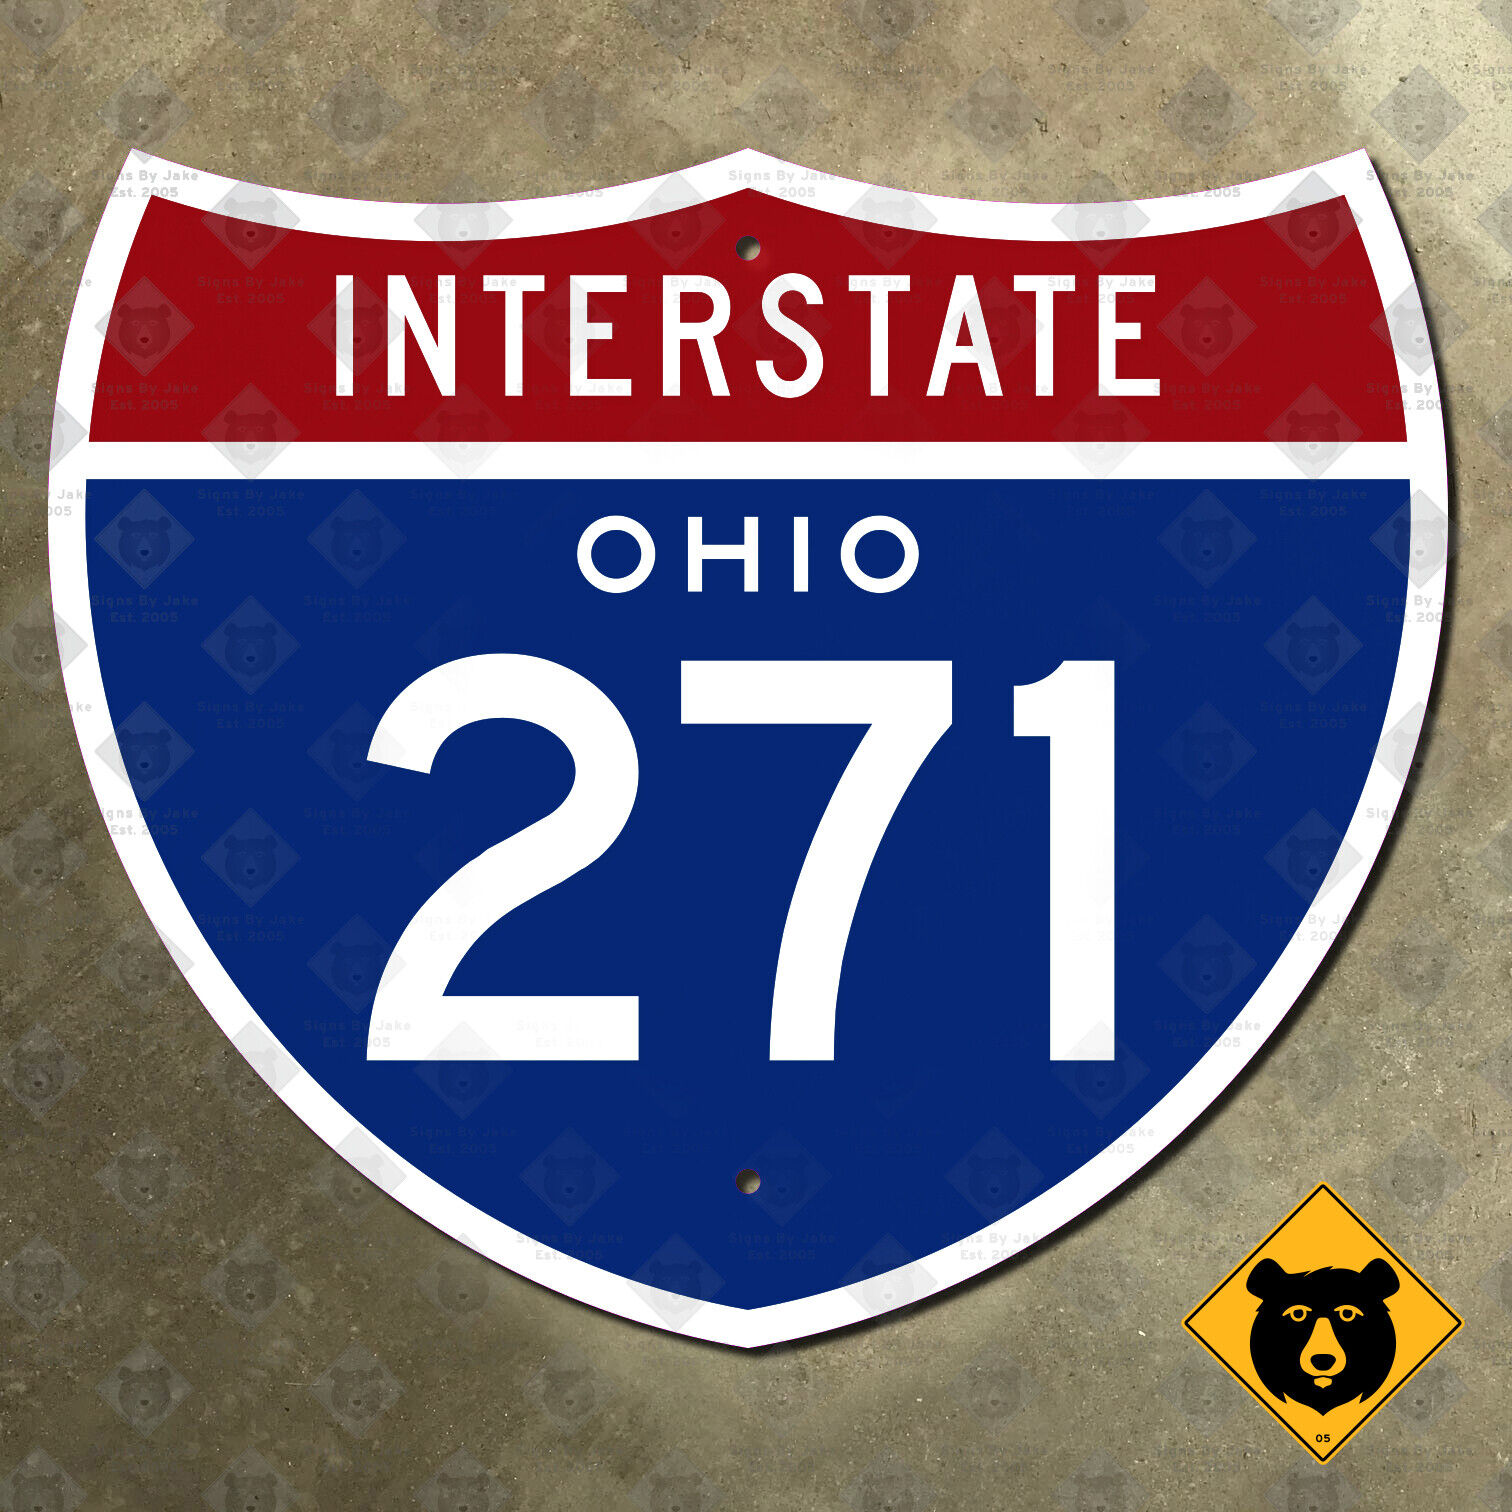 Ohio Interstate 271 highway route sign 1957 Cleveland Akron 12x10